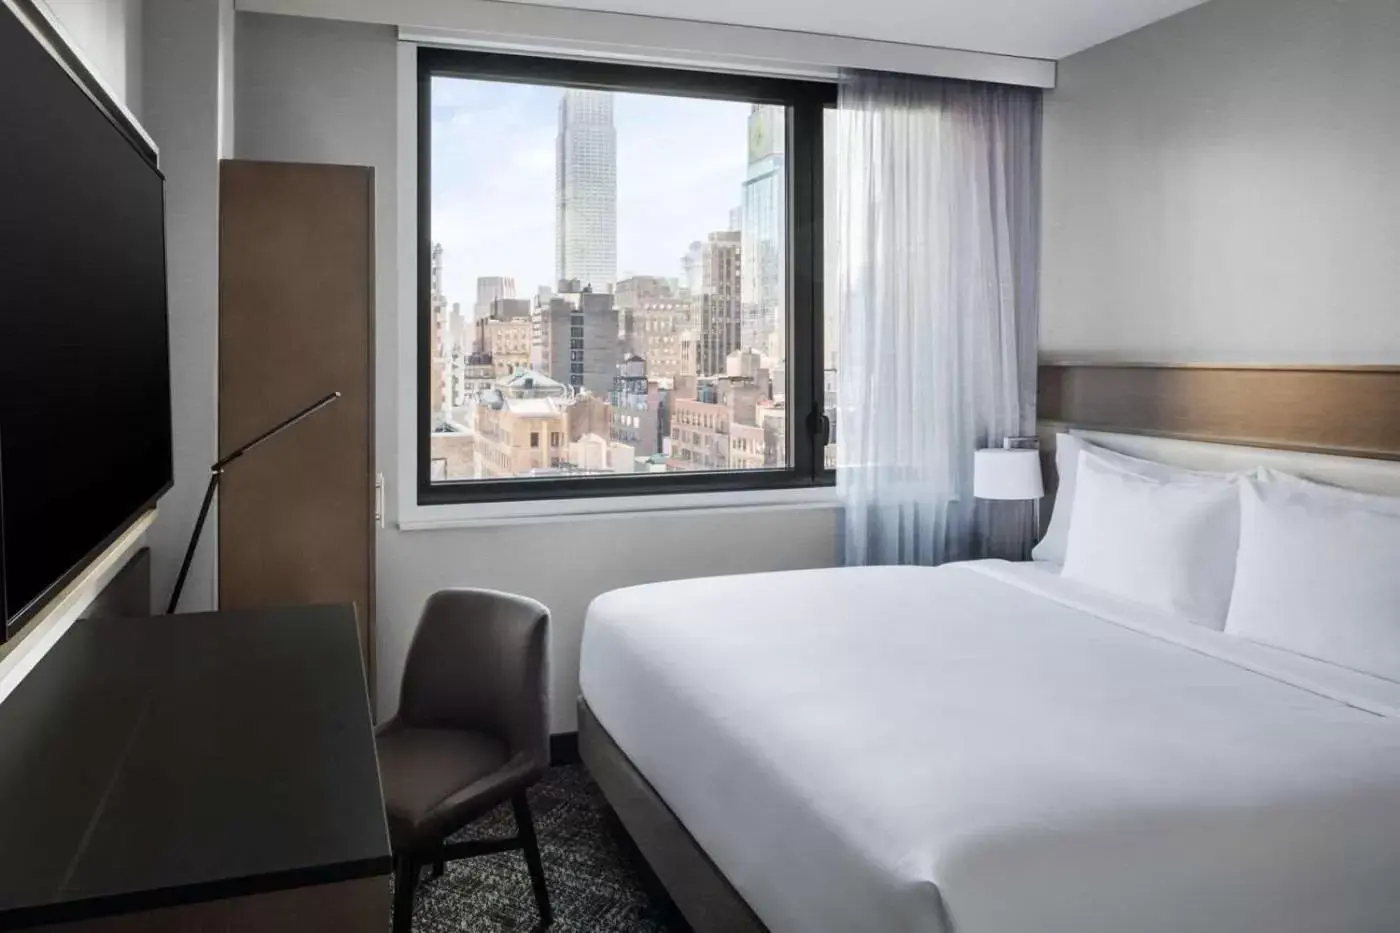 King Room with Empire State Building View in DoubleTree by Hilton New York Times Square South